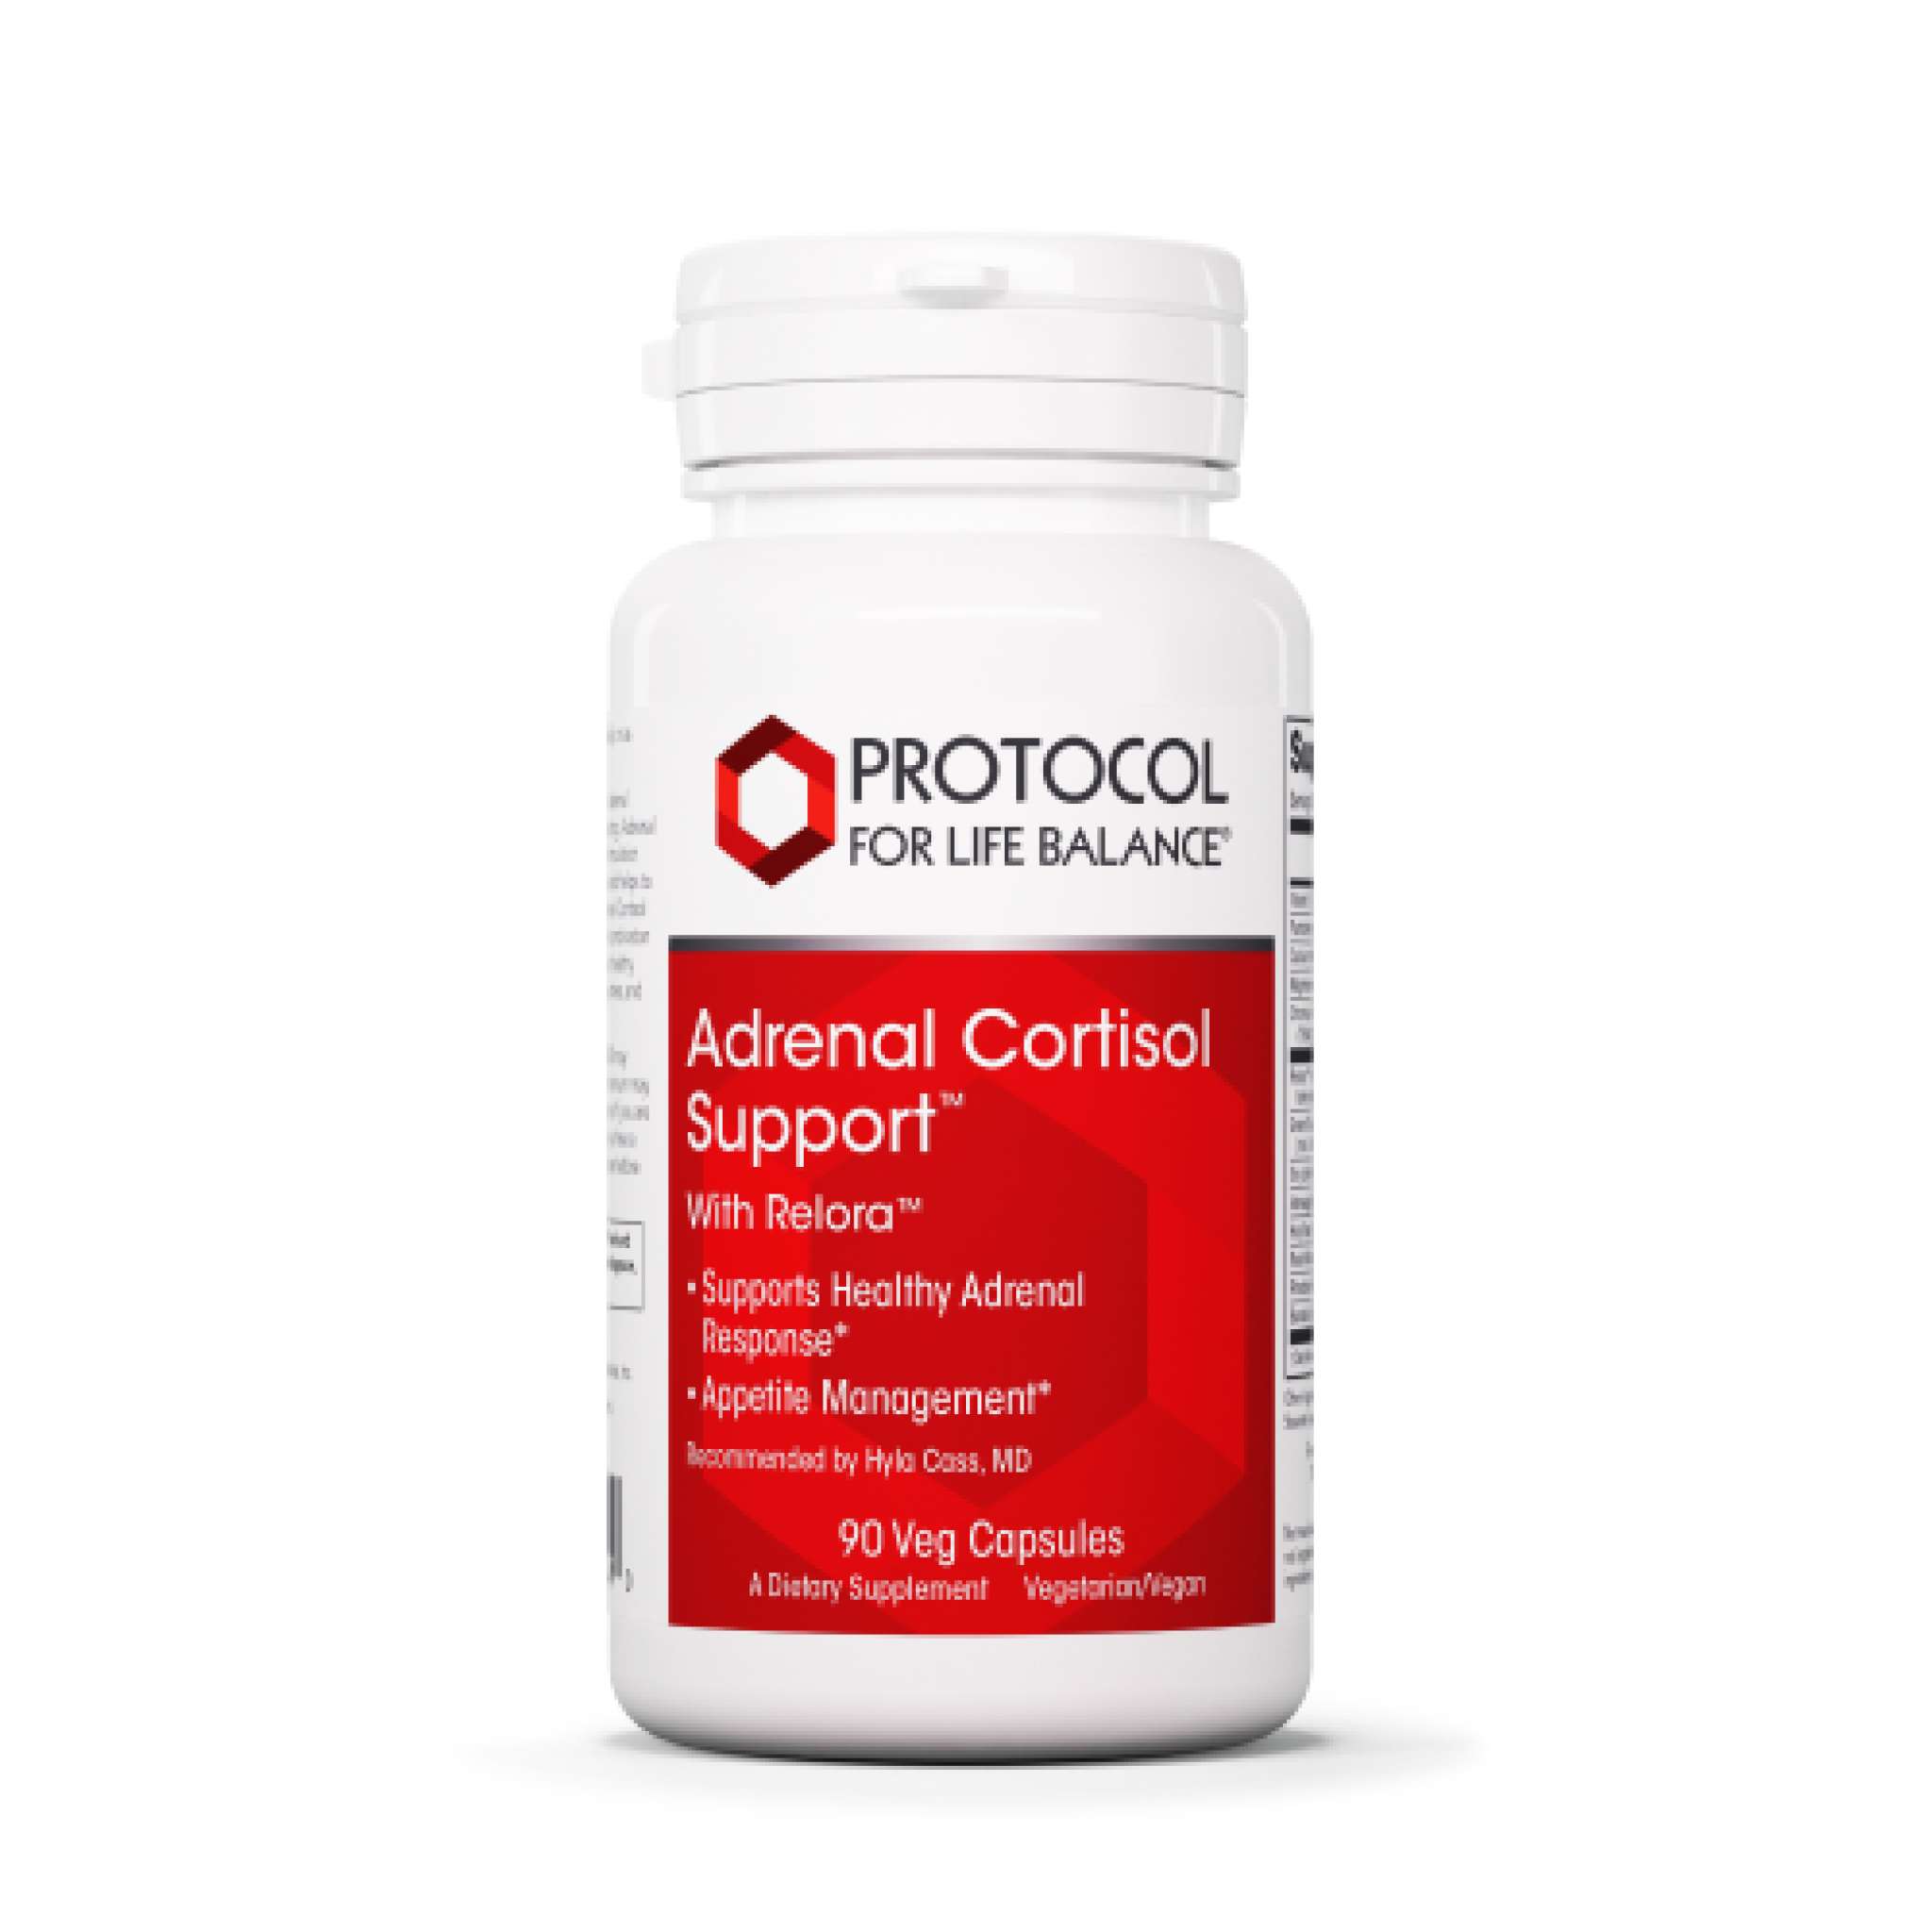 Protocol For Life Balance - Adrenal Cortisol Support